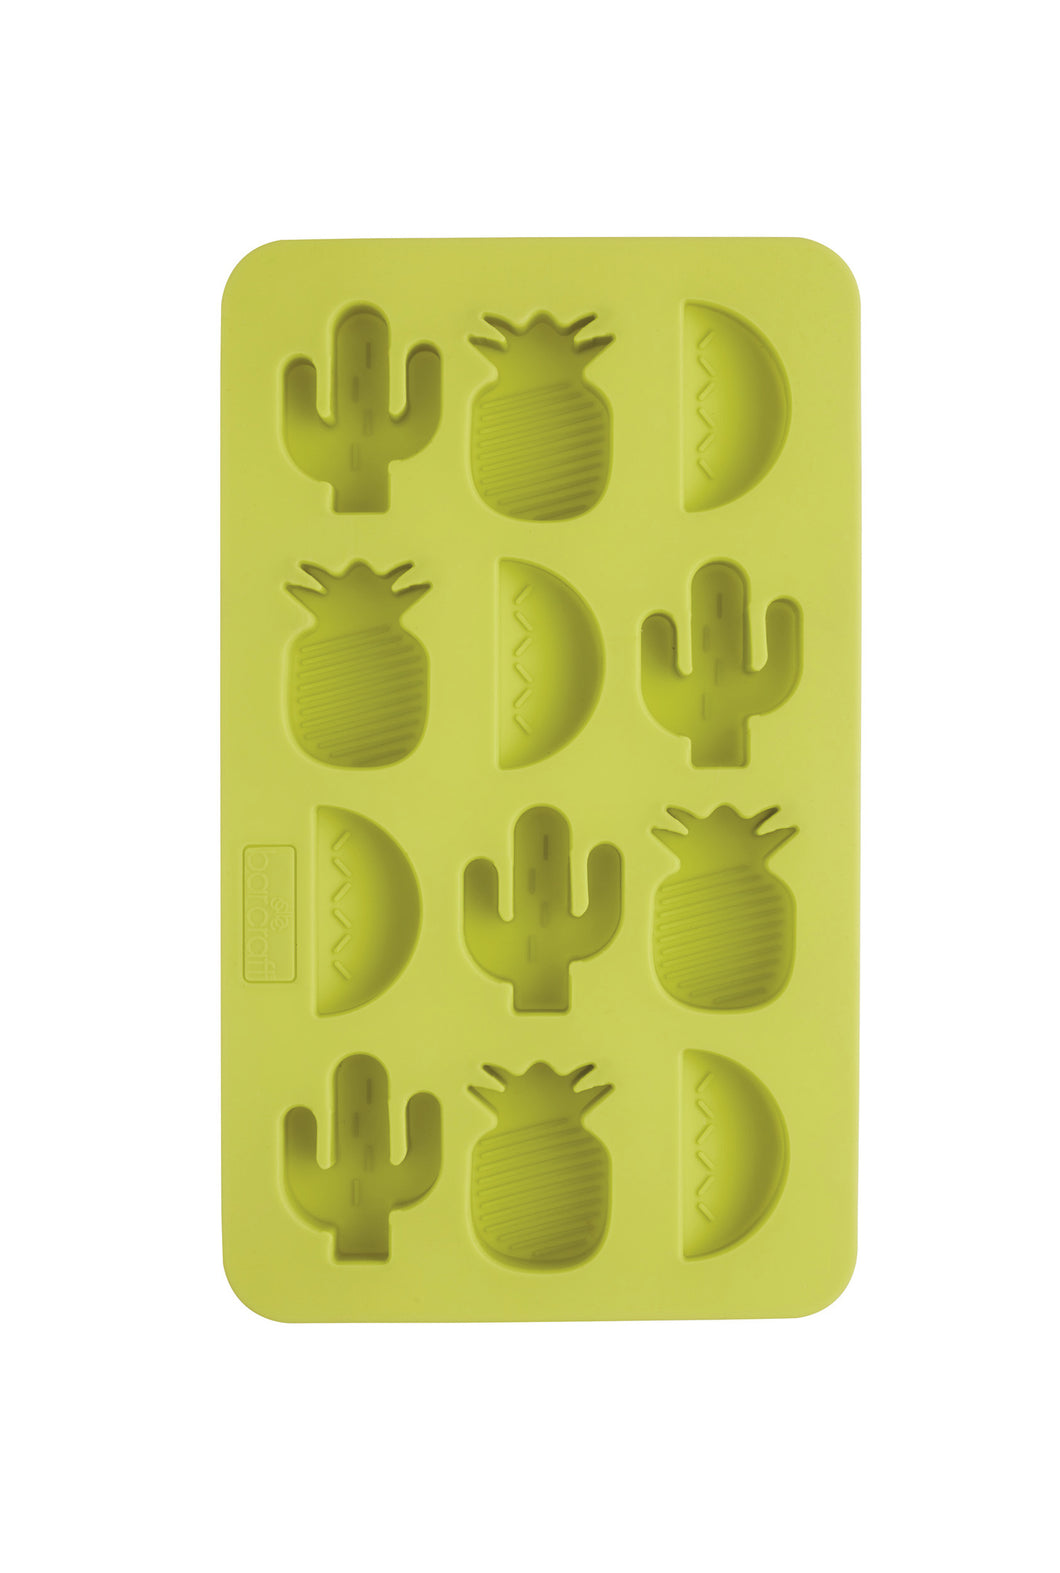 BARCRAFT <BR>
Novelty Silicone Ice Cube Tray <BR>
Green <BR>